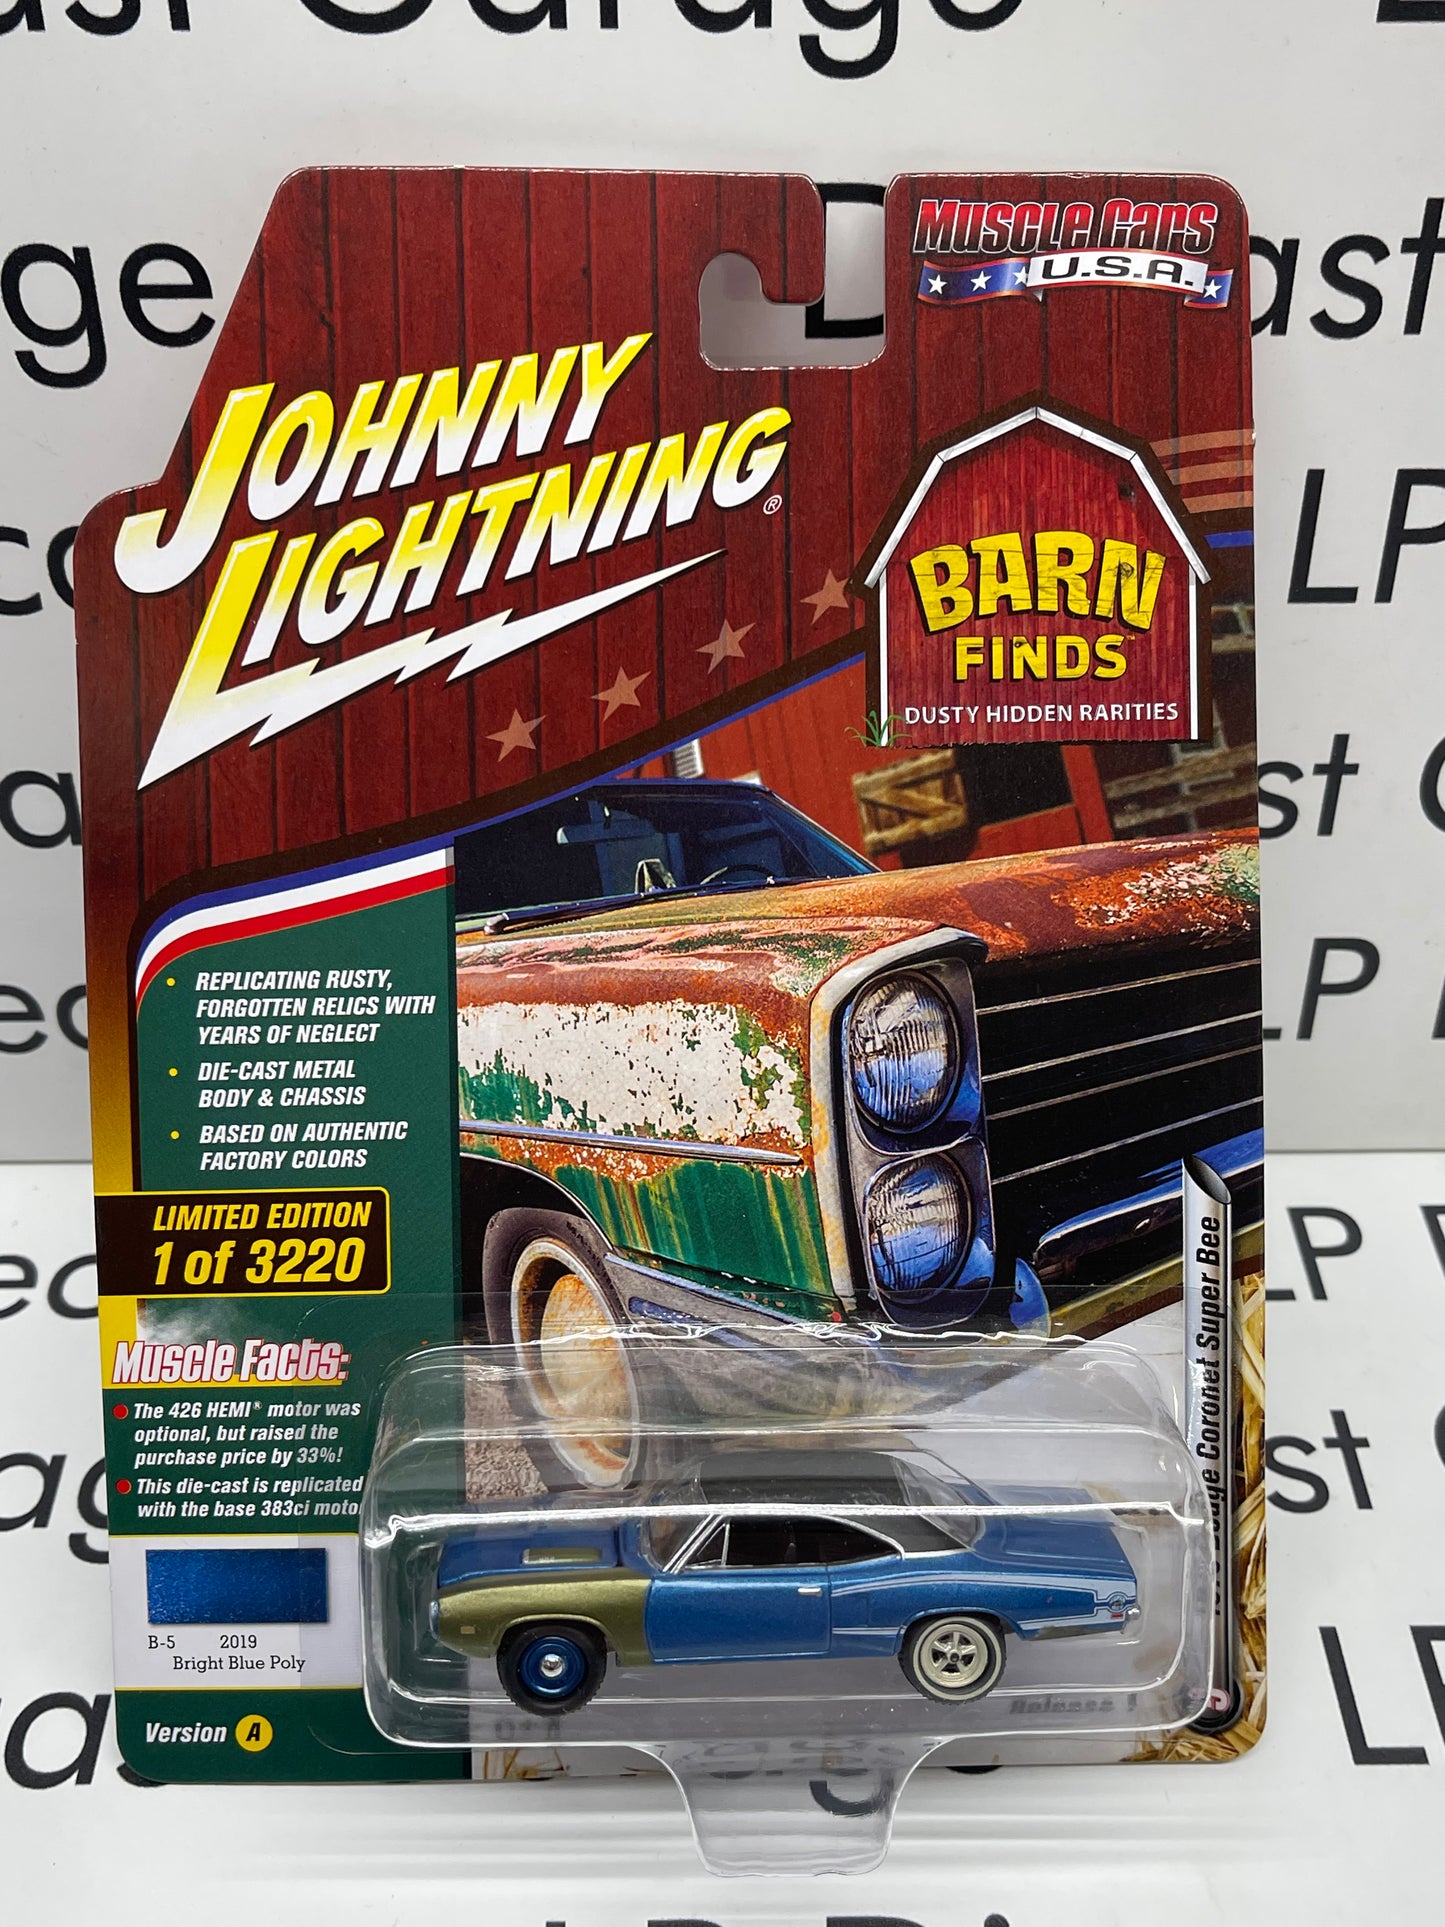 Johnny Lightning 1970 Dodge Coronet Super Bee Bright Blue Poly "Barn Finds" 1:64 Diecast